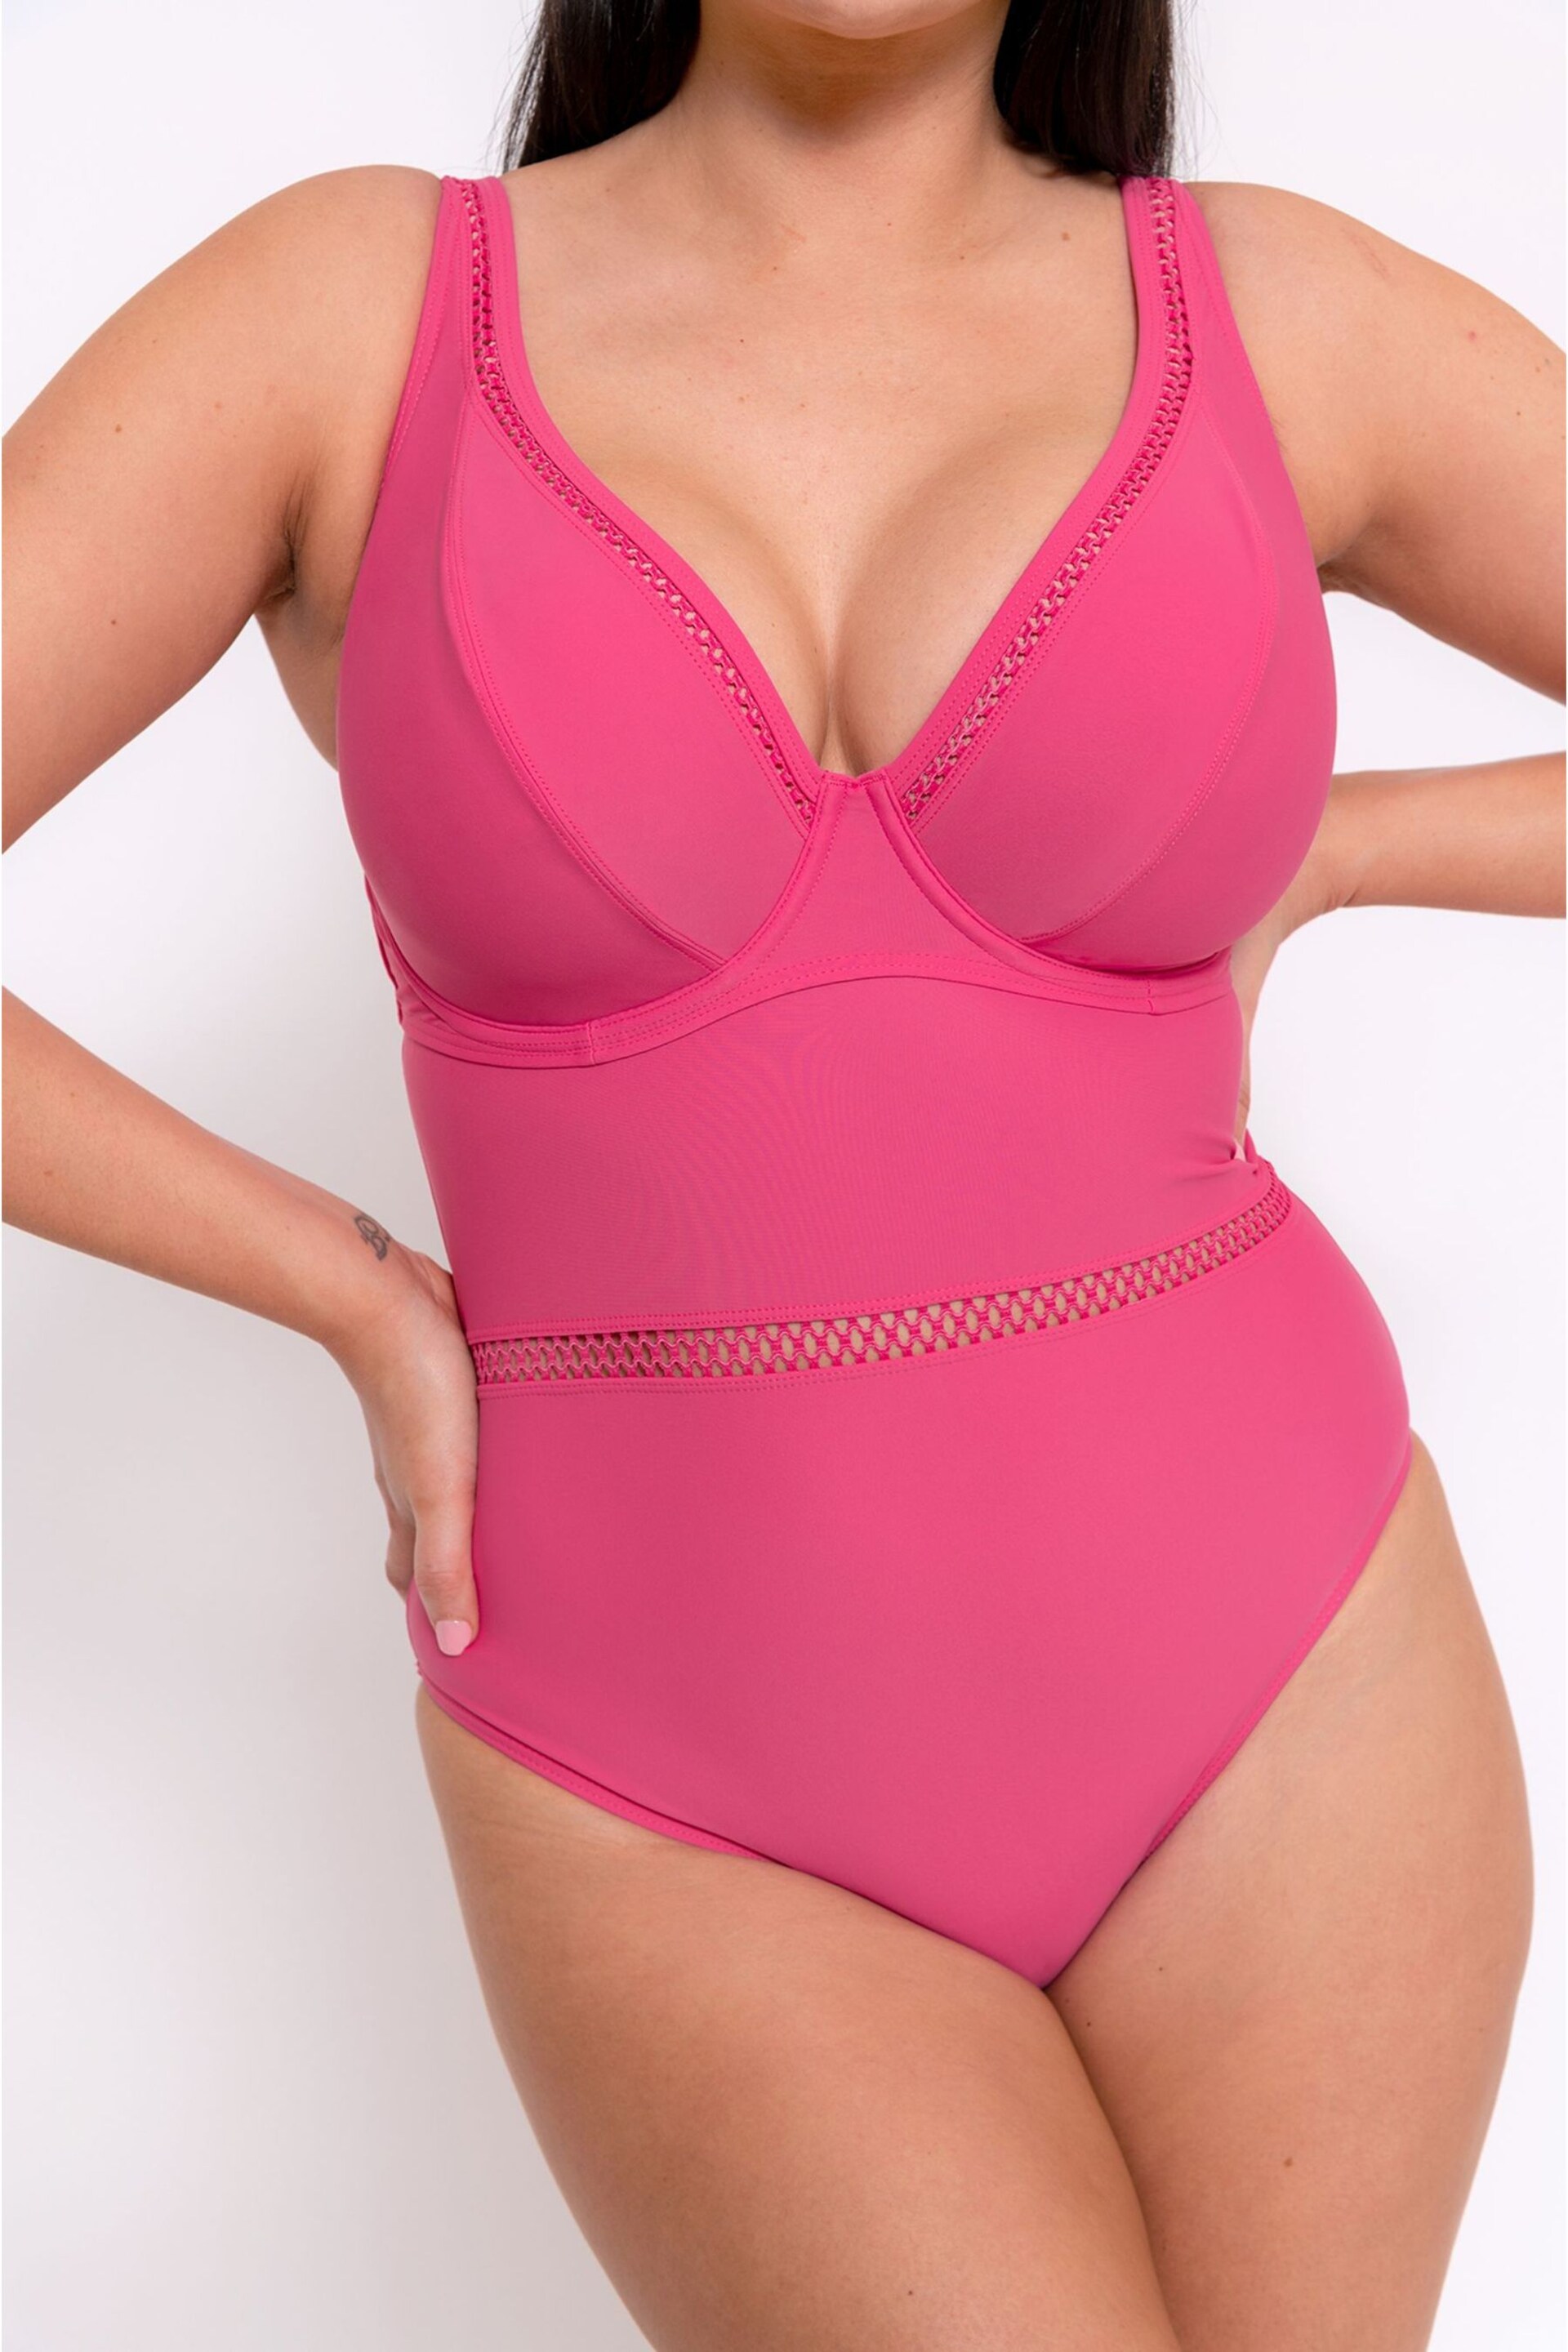 Curvy Kate Pink First Class Plunge Swimsuit - Image 4 of 5